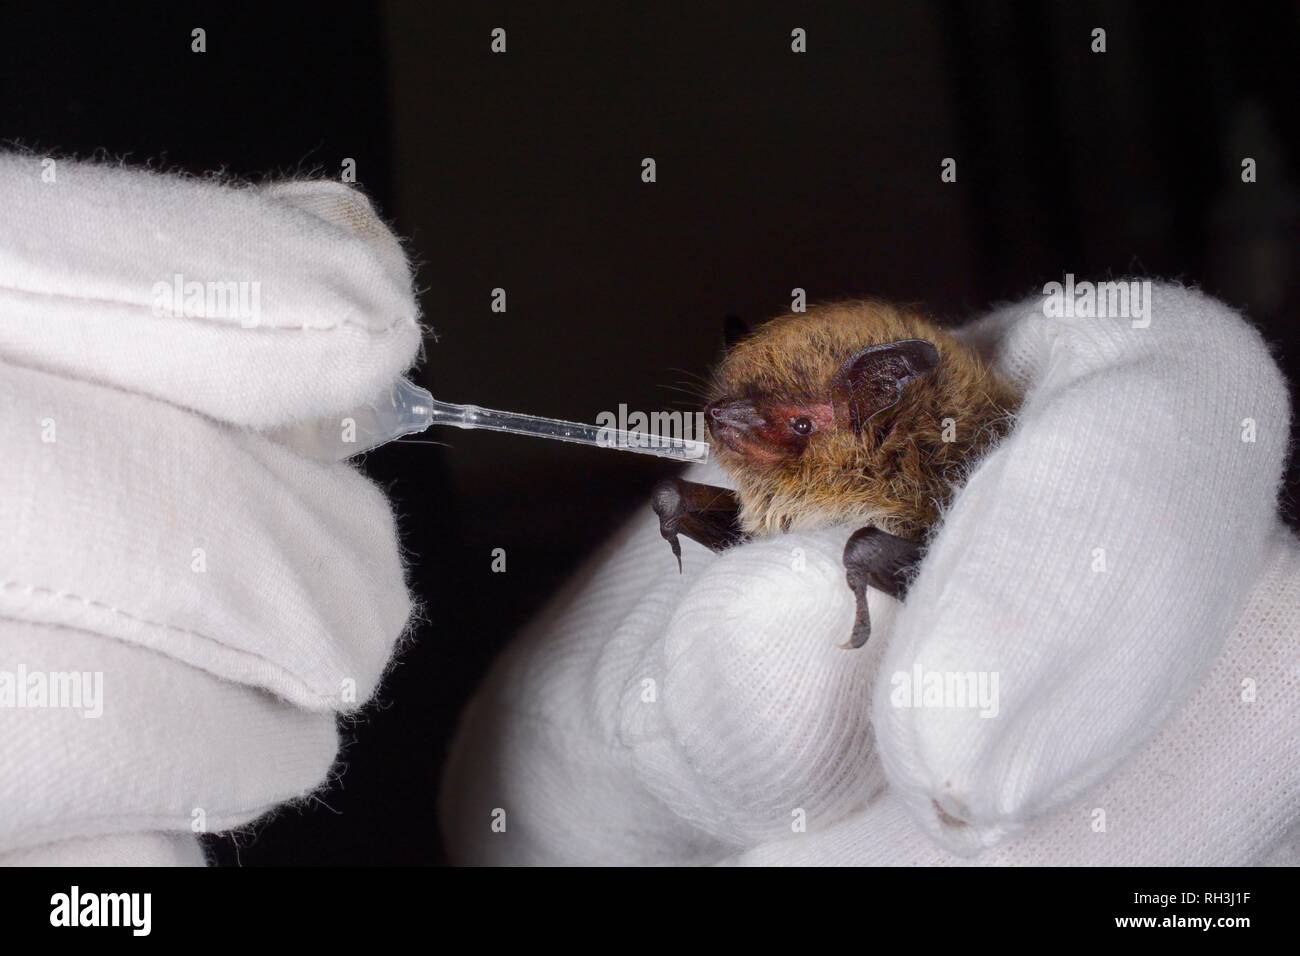 Whiskered bat (Myotis mystacinus) given water from a pipette by Samantha Pickering at the bat rescue centre at her home, Barnstaple, Devon, UK Stock Photo